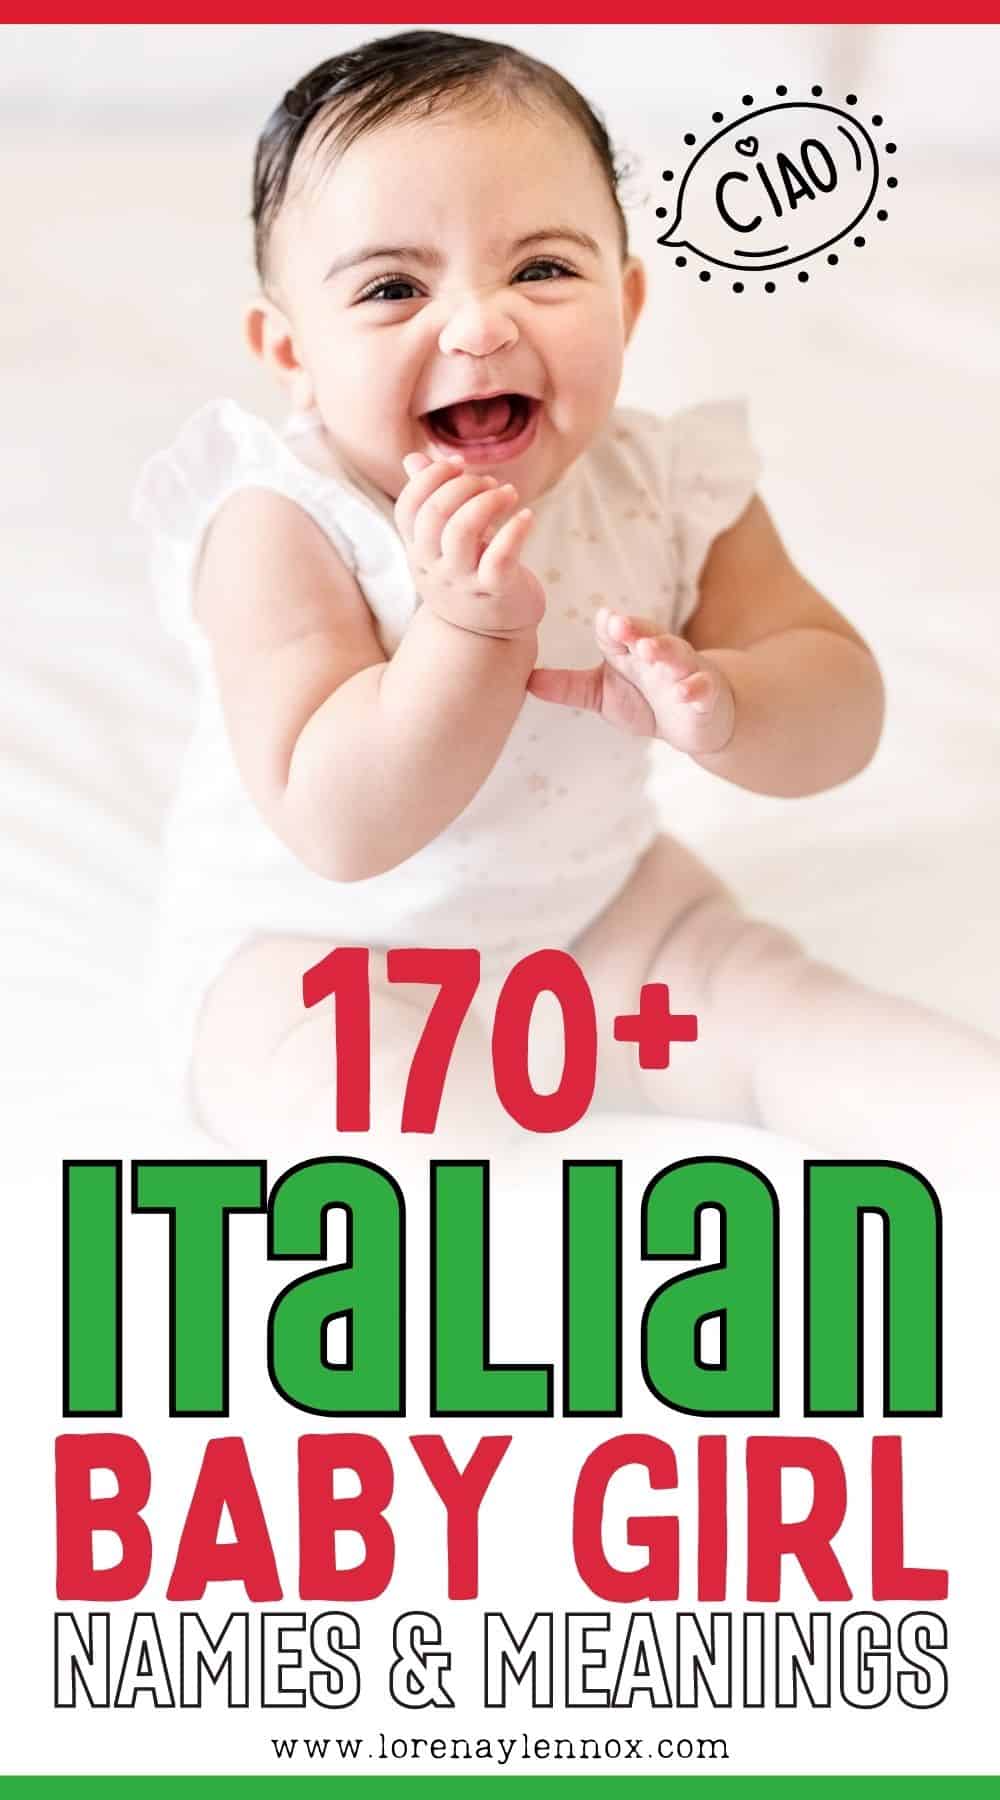 Embark on a journey through the allure of Italian culture with this diverse collection of 140+ baby girl names. From timeless classics to modern gems, these names are sure to inspire parents worldwide. #ItalianBabyNames #BabyGirlNames #ItalianNames #NamesWithMeaning #BabyNames #Parenting #BambinaNames #UniqueNames